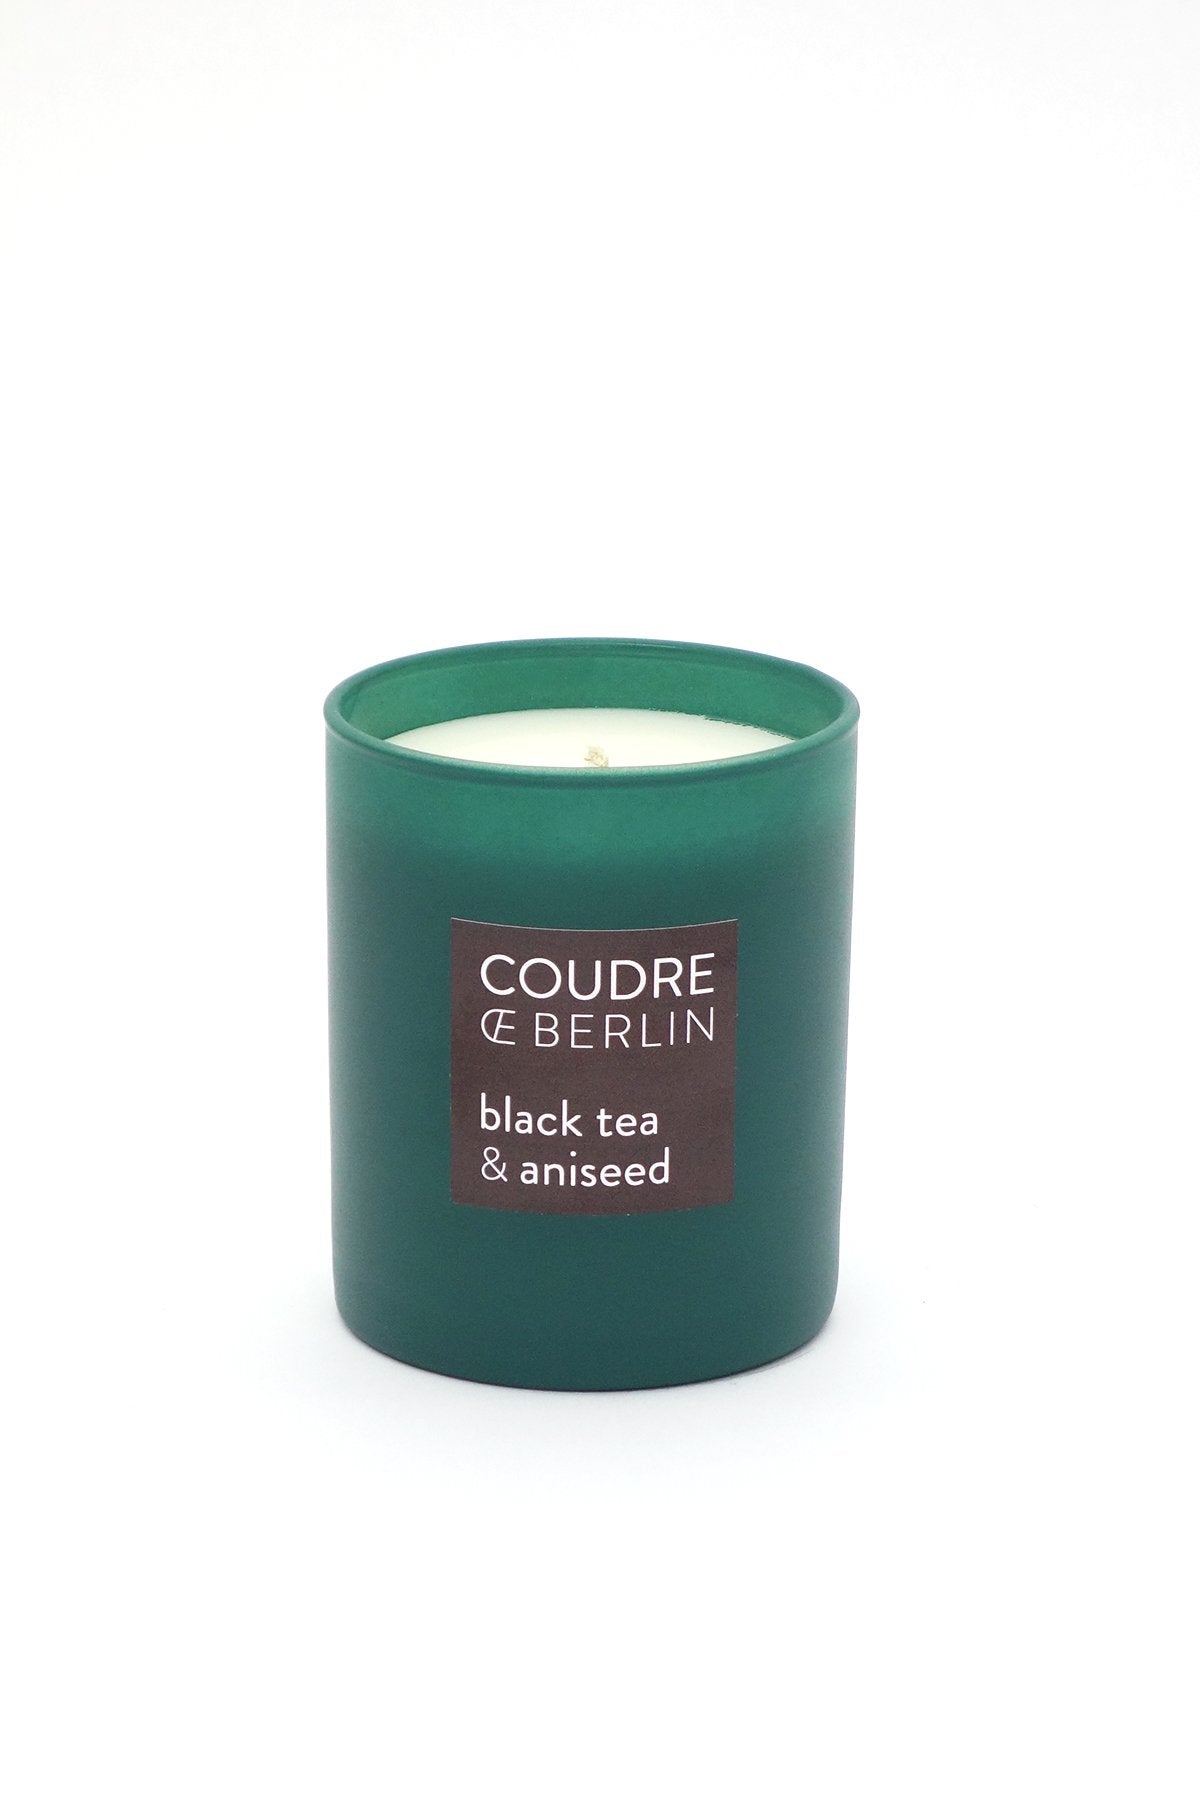  Coudre Berlin  Black Tea and Anise Contemporaries Scented Candle